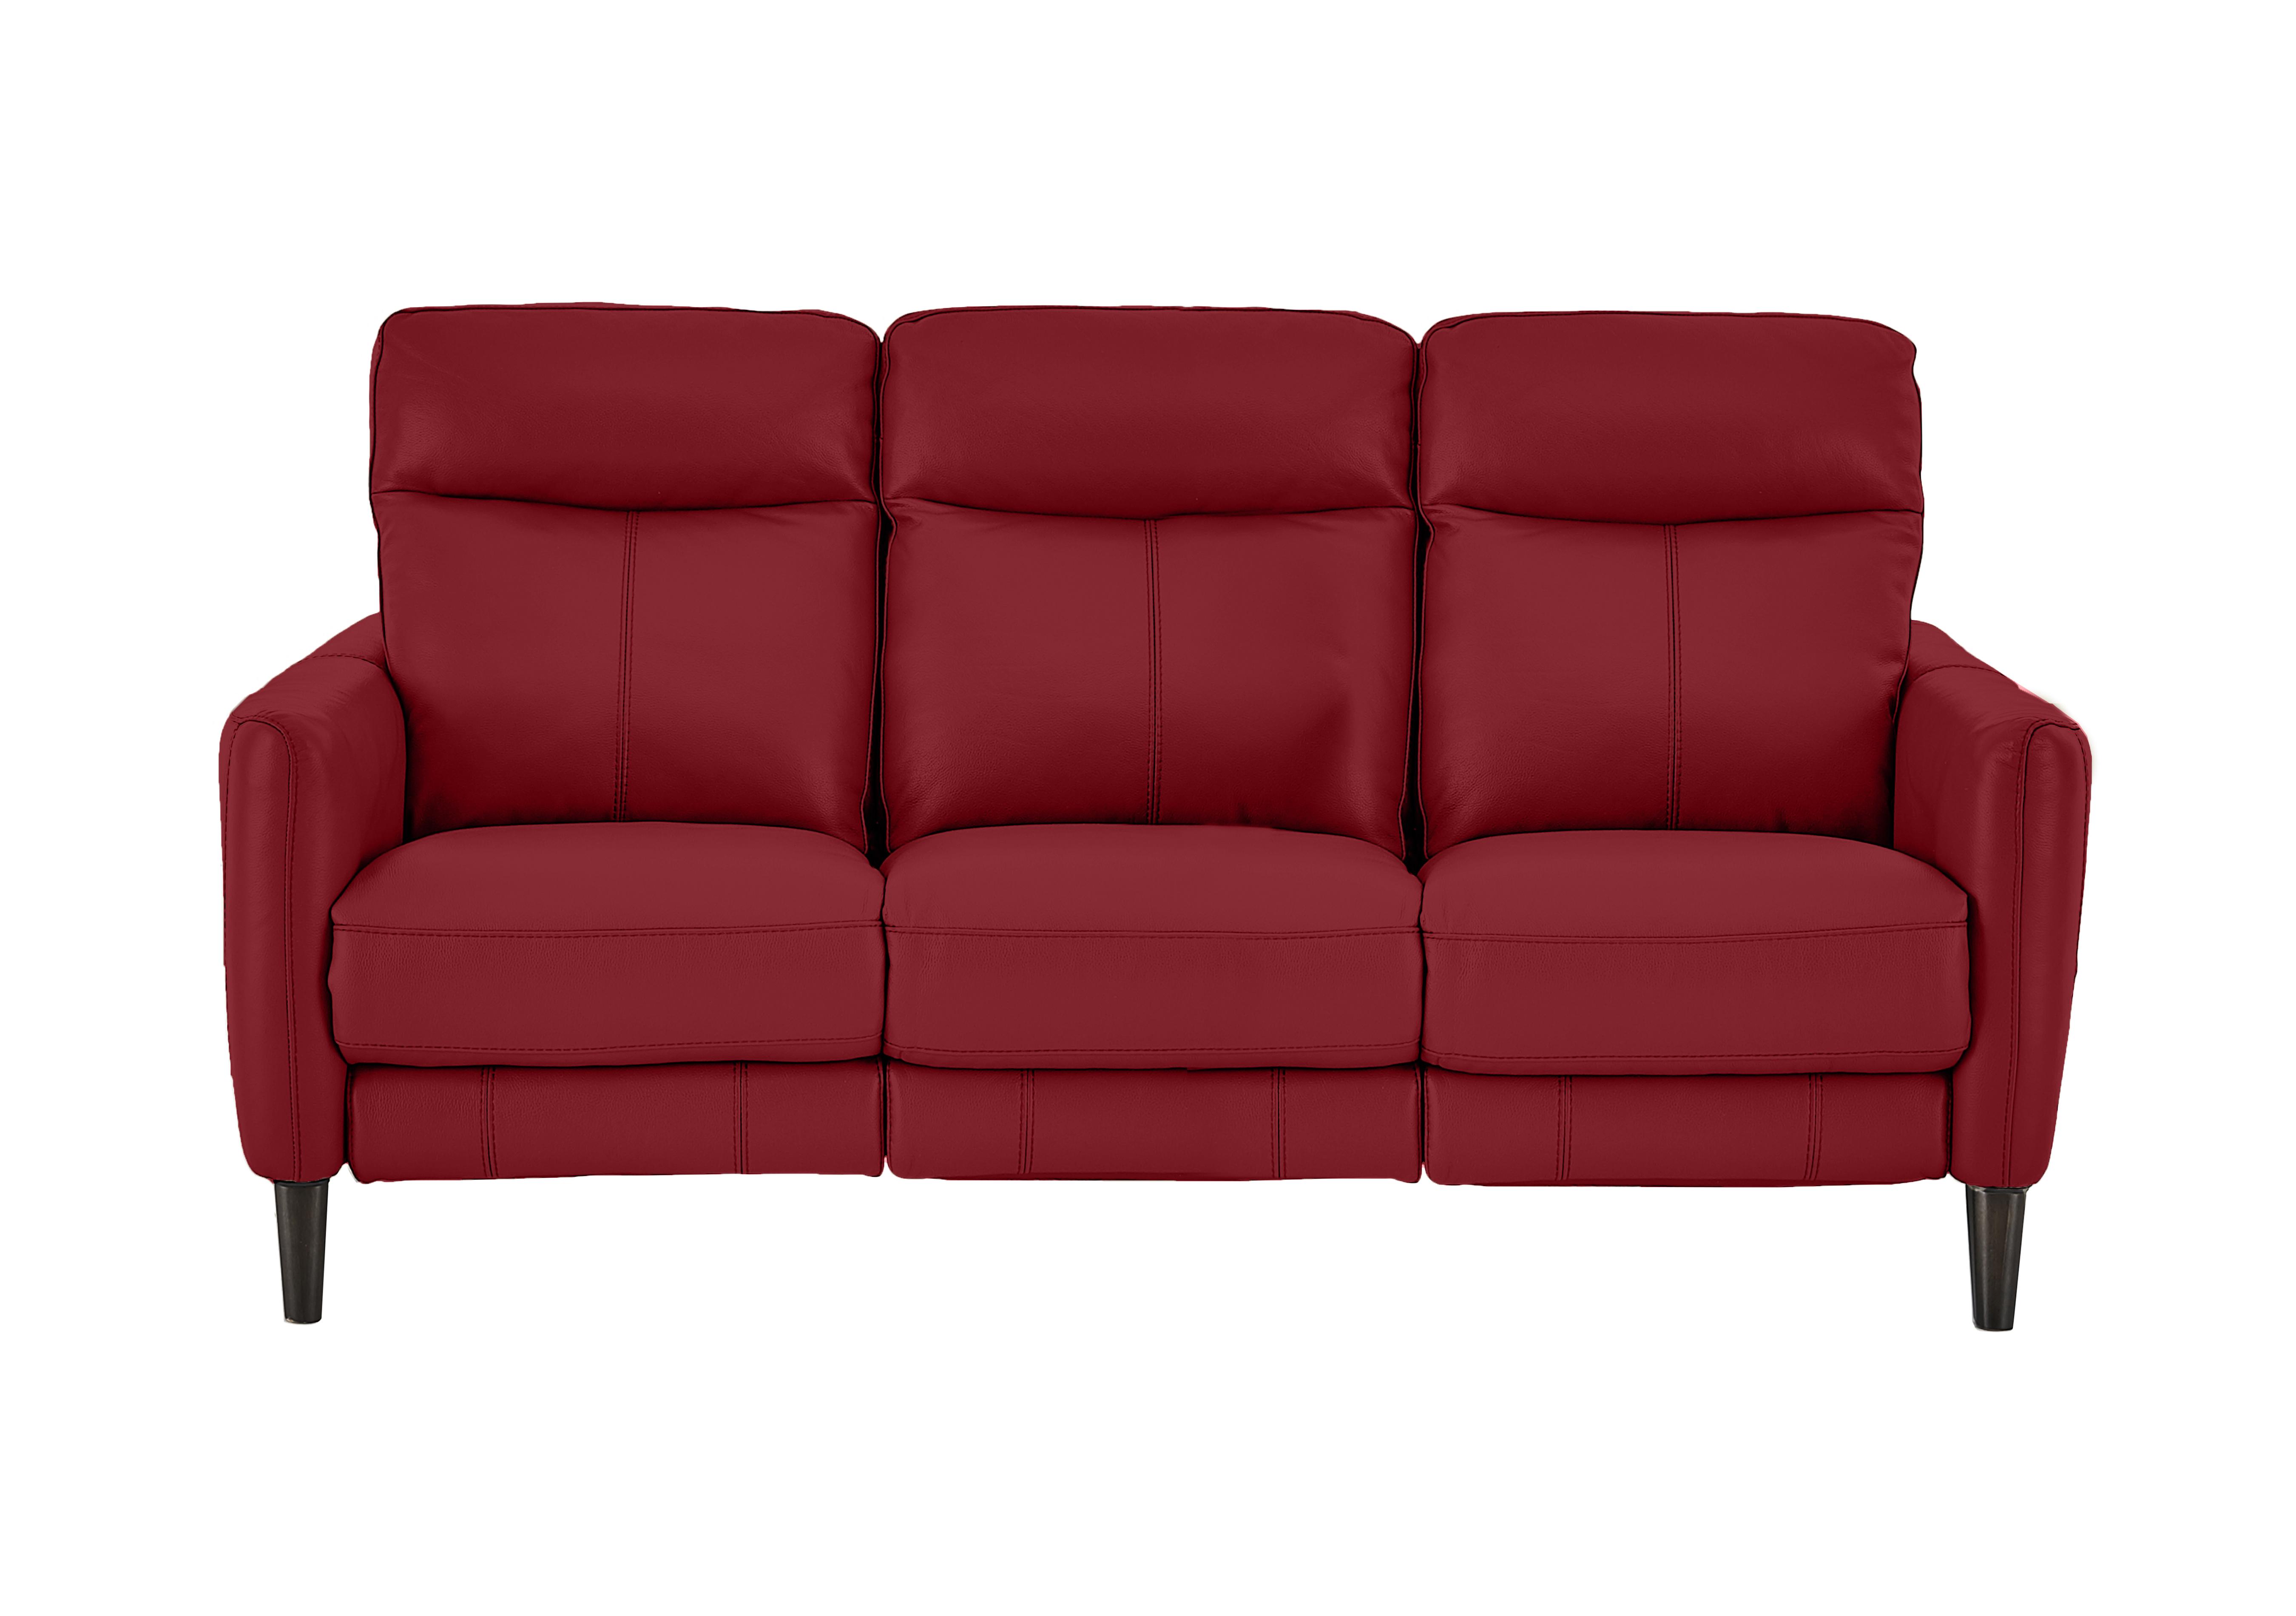 Compact Collection Petit 3 Seater Leather Sofa in Bv-0008 Pure Red on Furniture Village